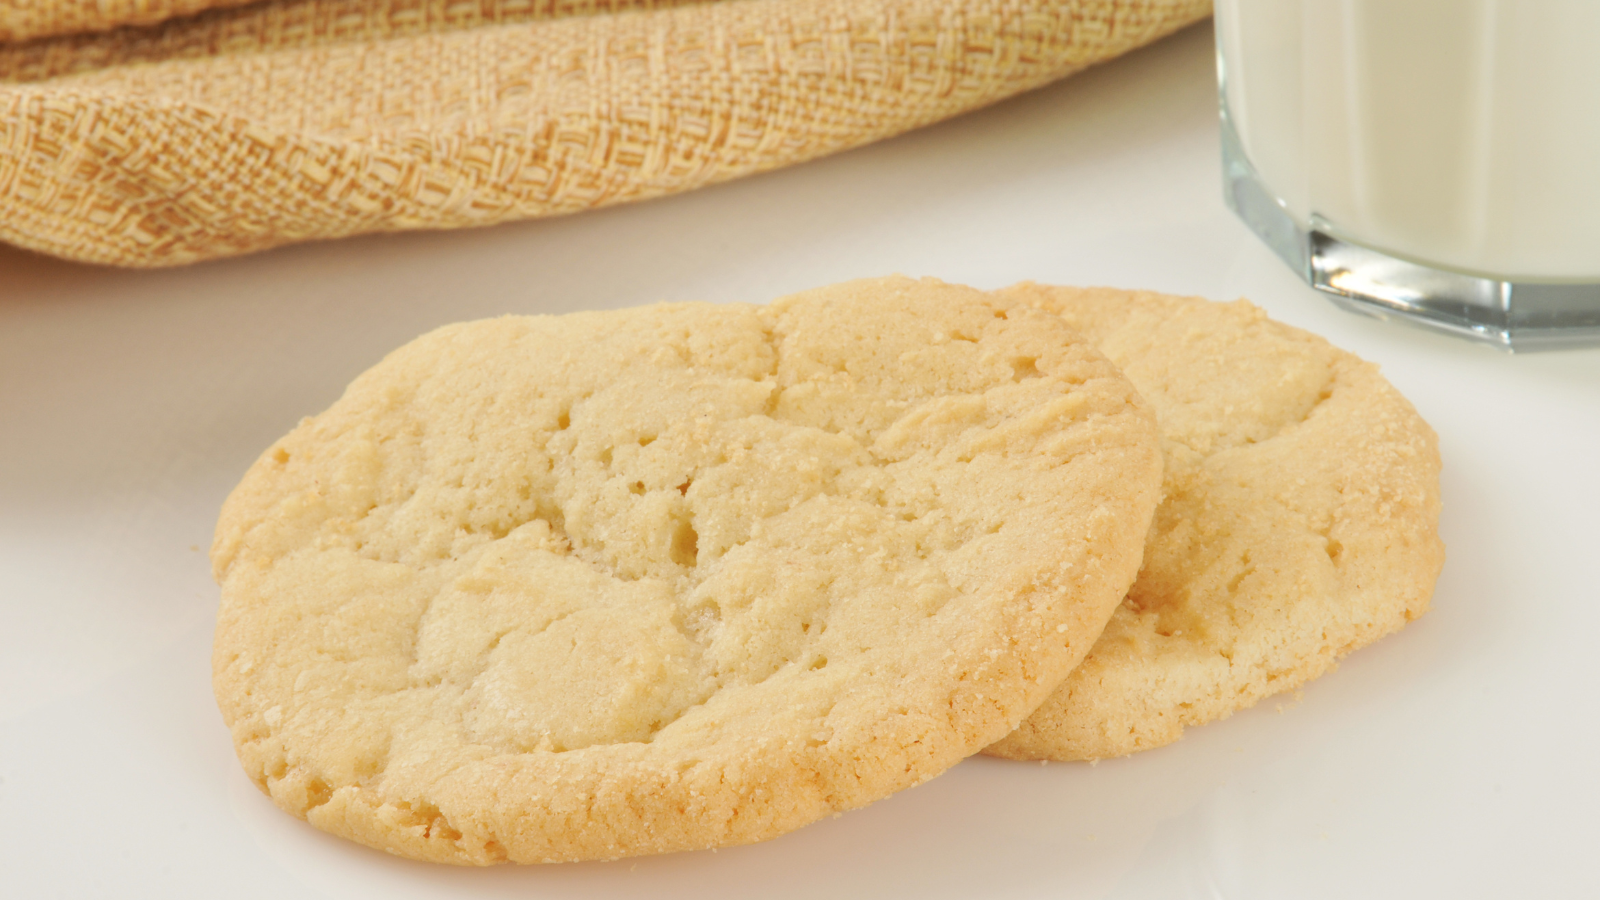 The Best Sugar Cookies Require a Great Oven